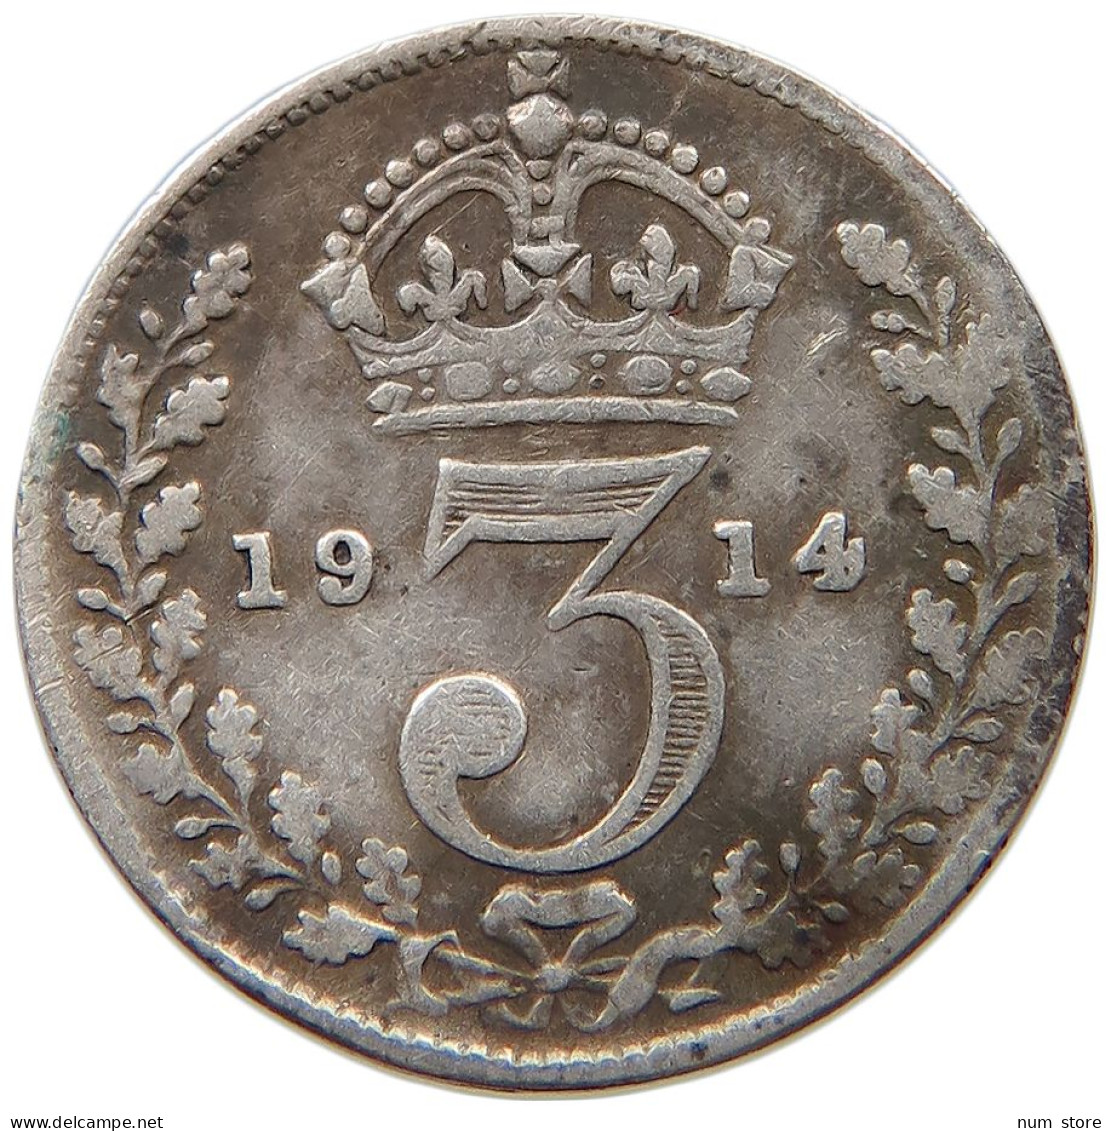 GREAT BRITAIN THREEPENCE 1914 #a033 0159 - F. 3 Pence